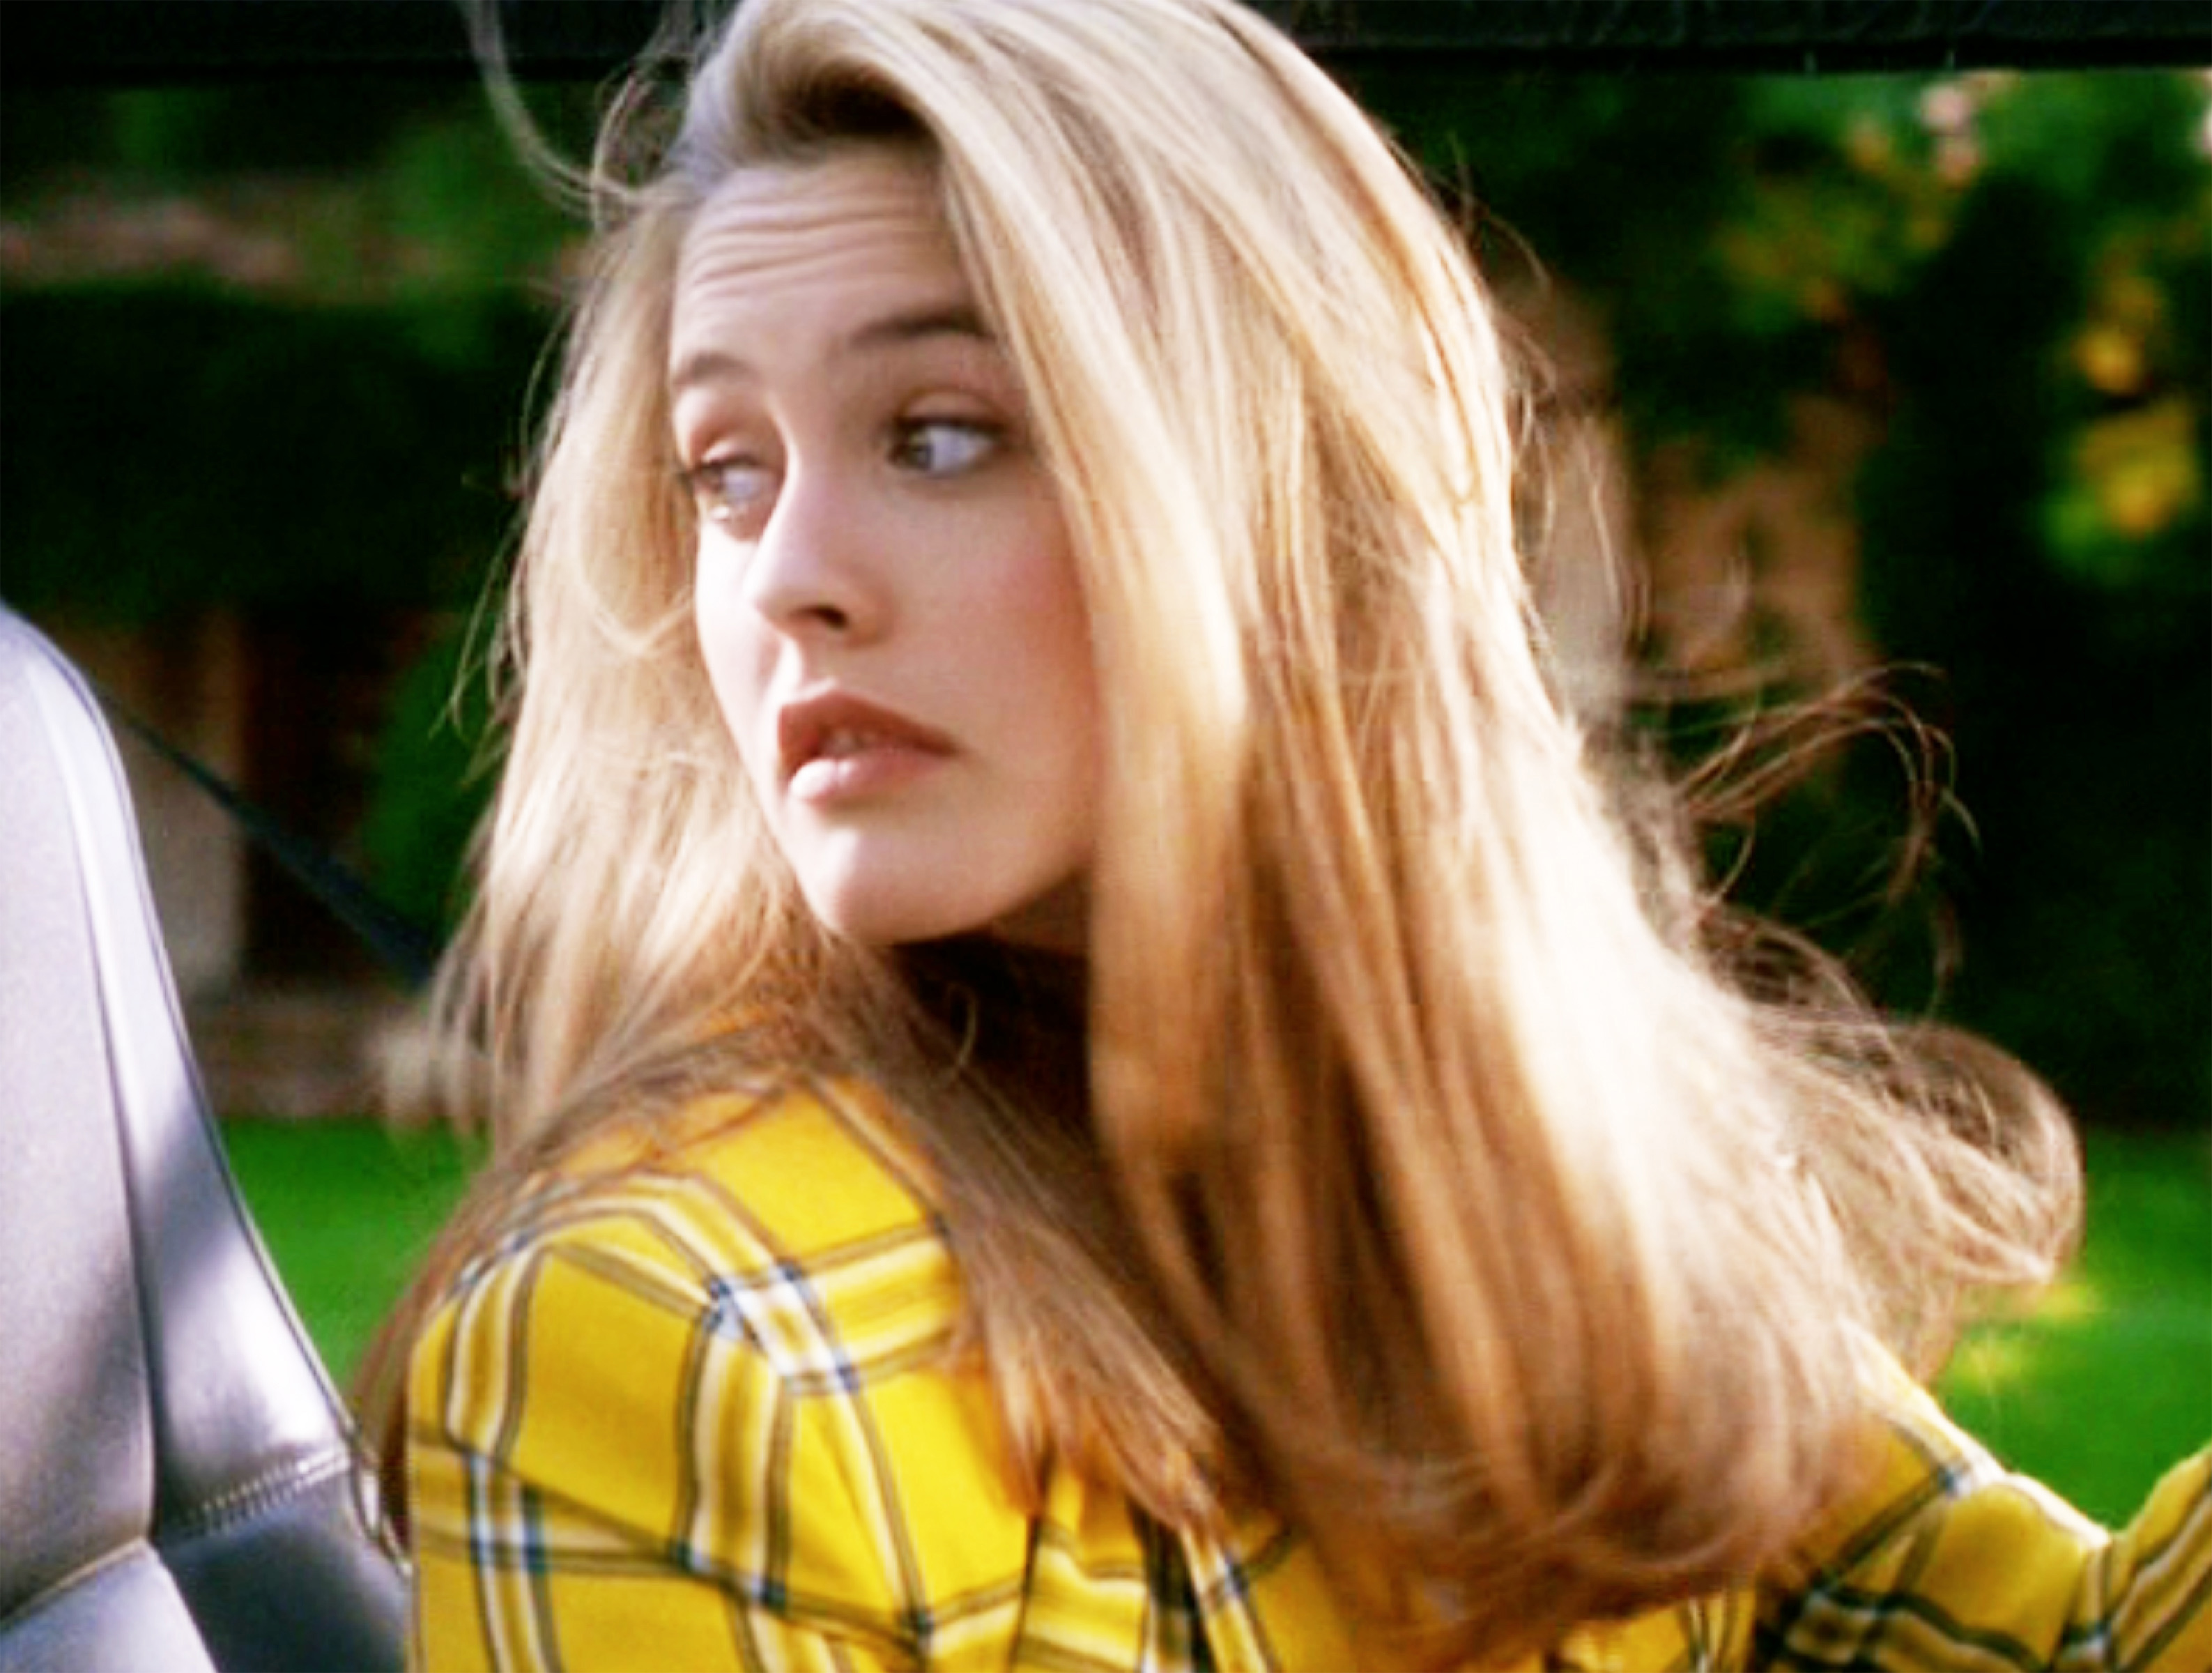 Alicia Silverstone in Clueless outfits